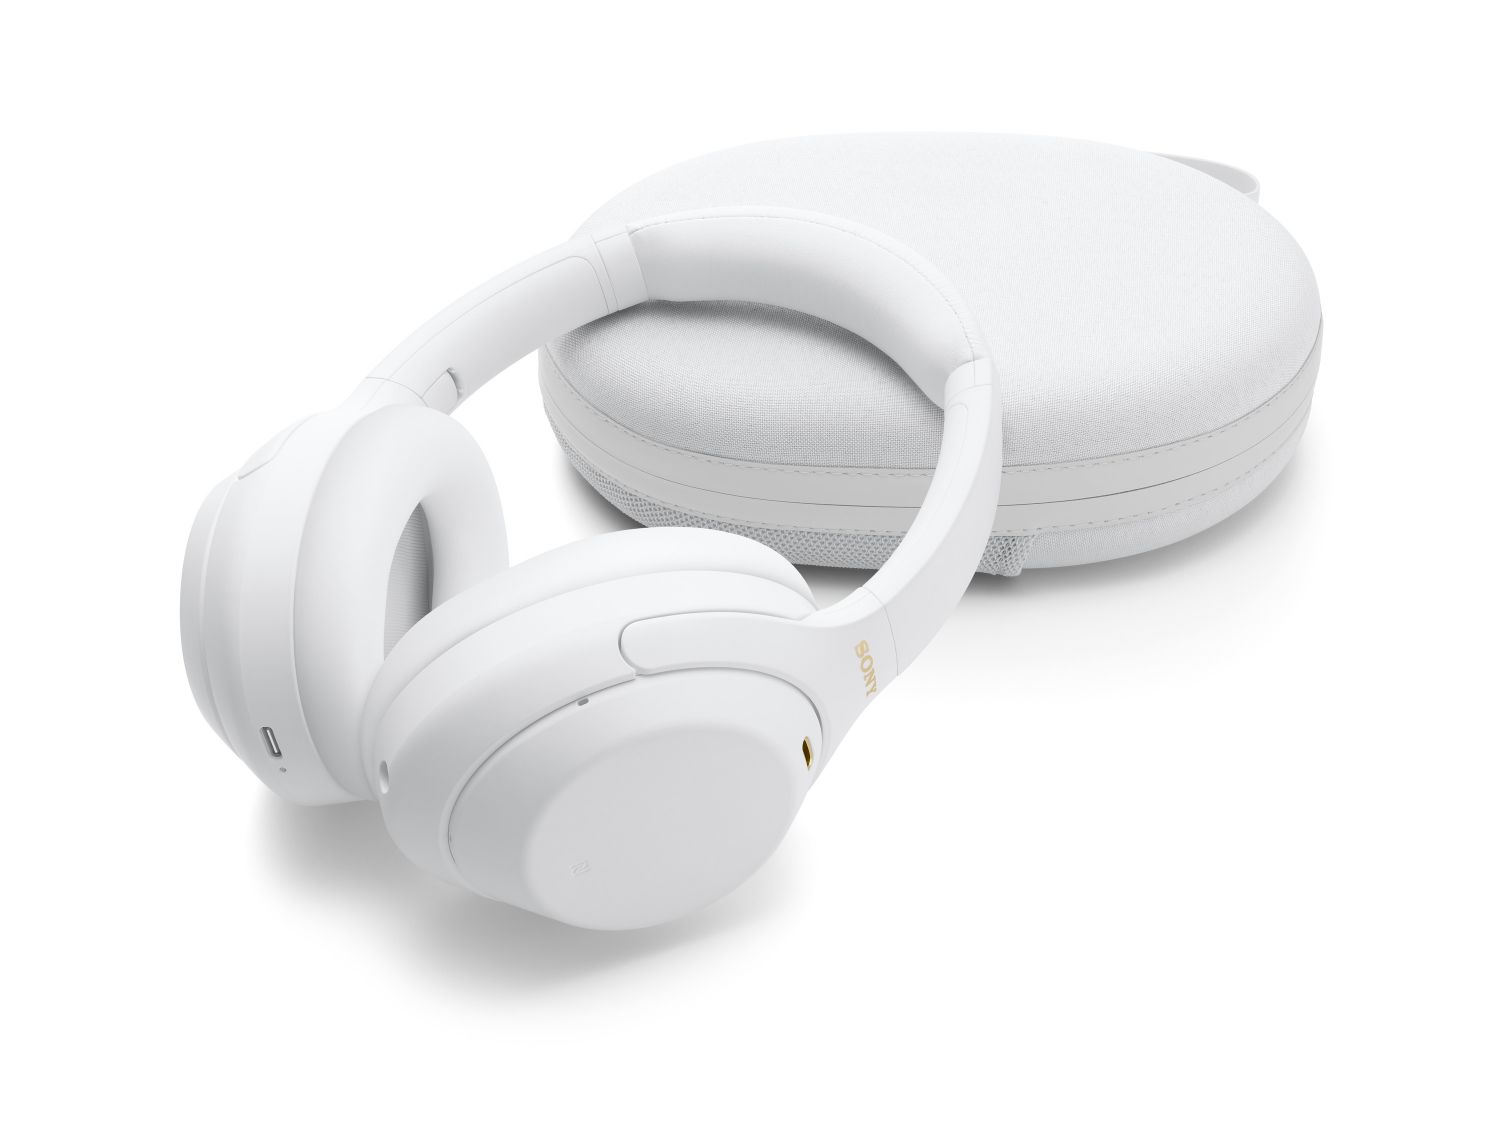 Sony Launches New Limited Edition Silent White WH-1000XM4 In 